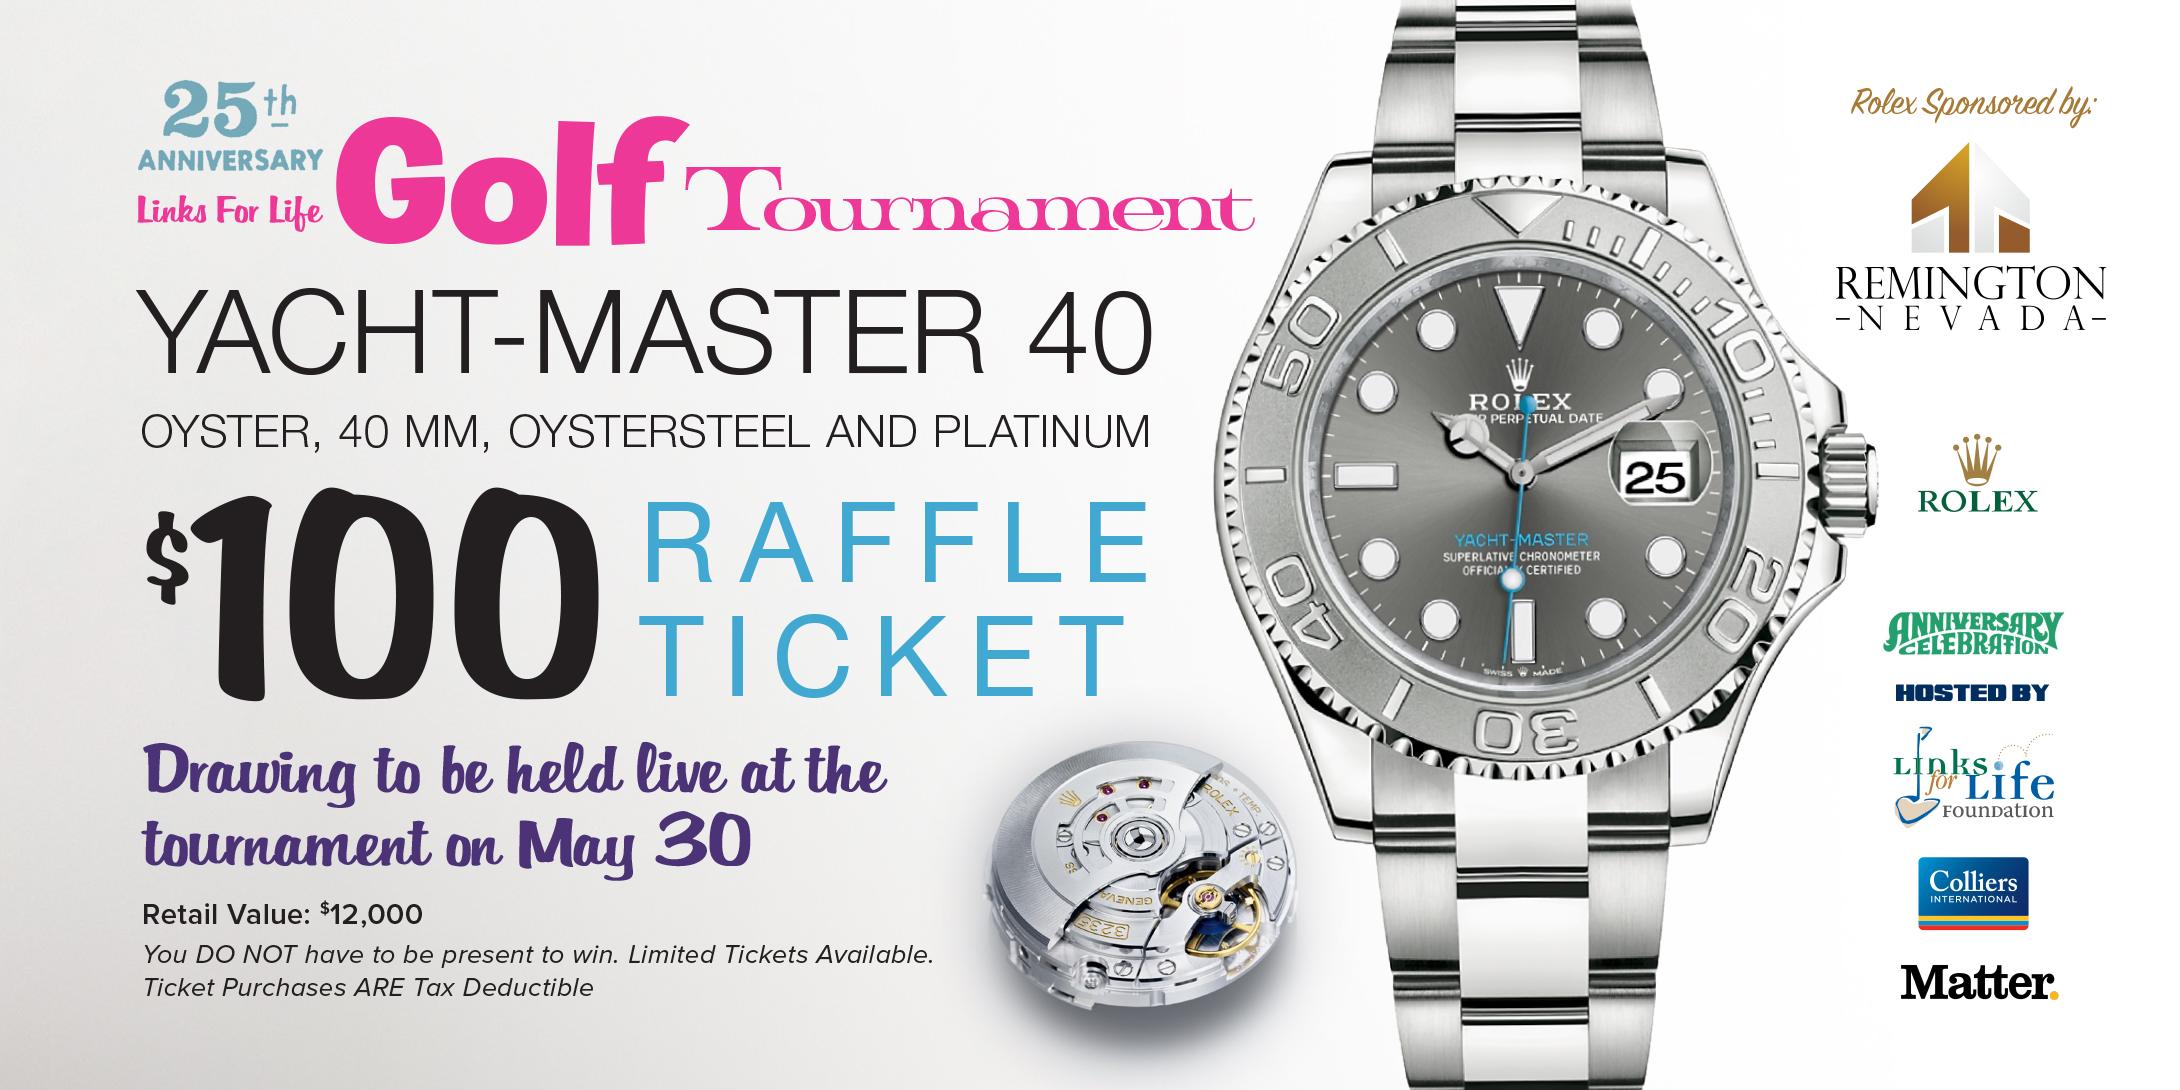 Vegas Baby! - 25th Annual Links for Life Golf Tournament (Rolex Raffle)